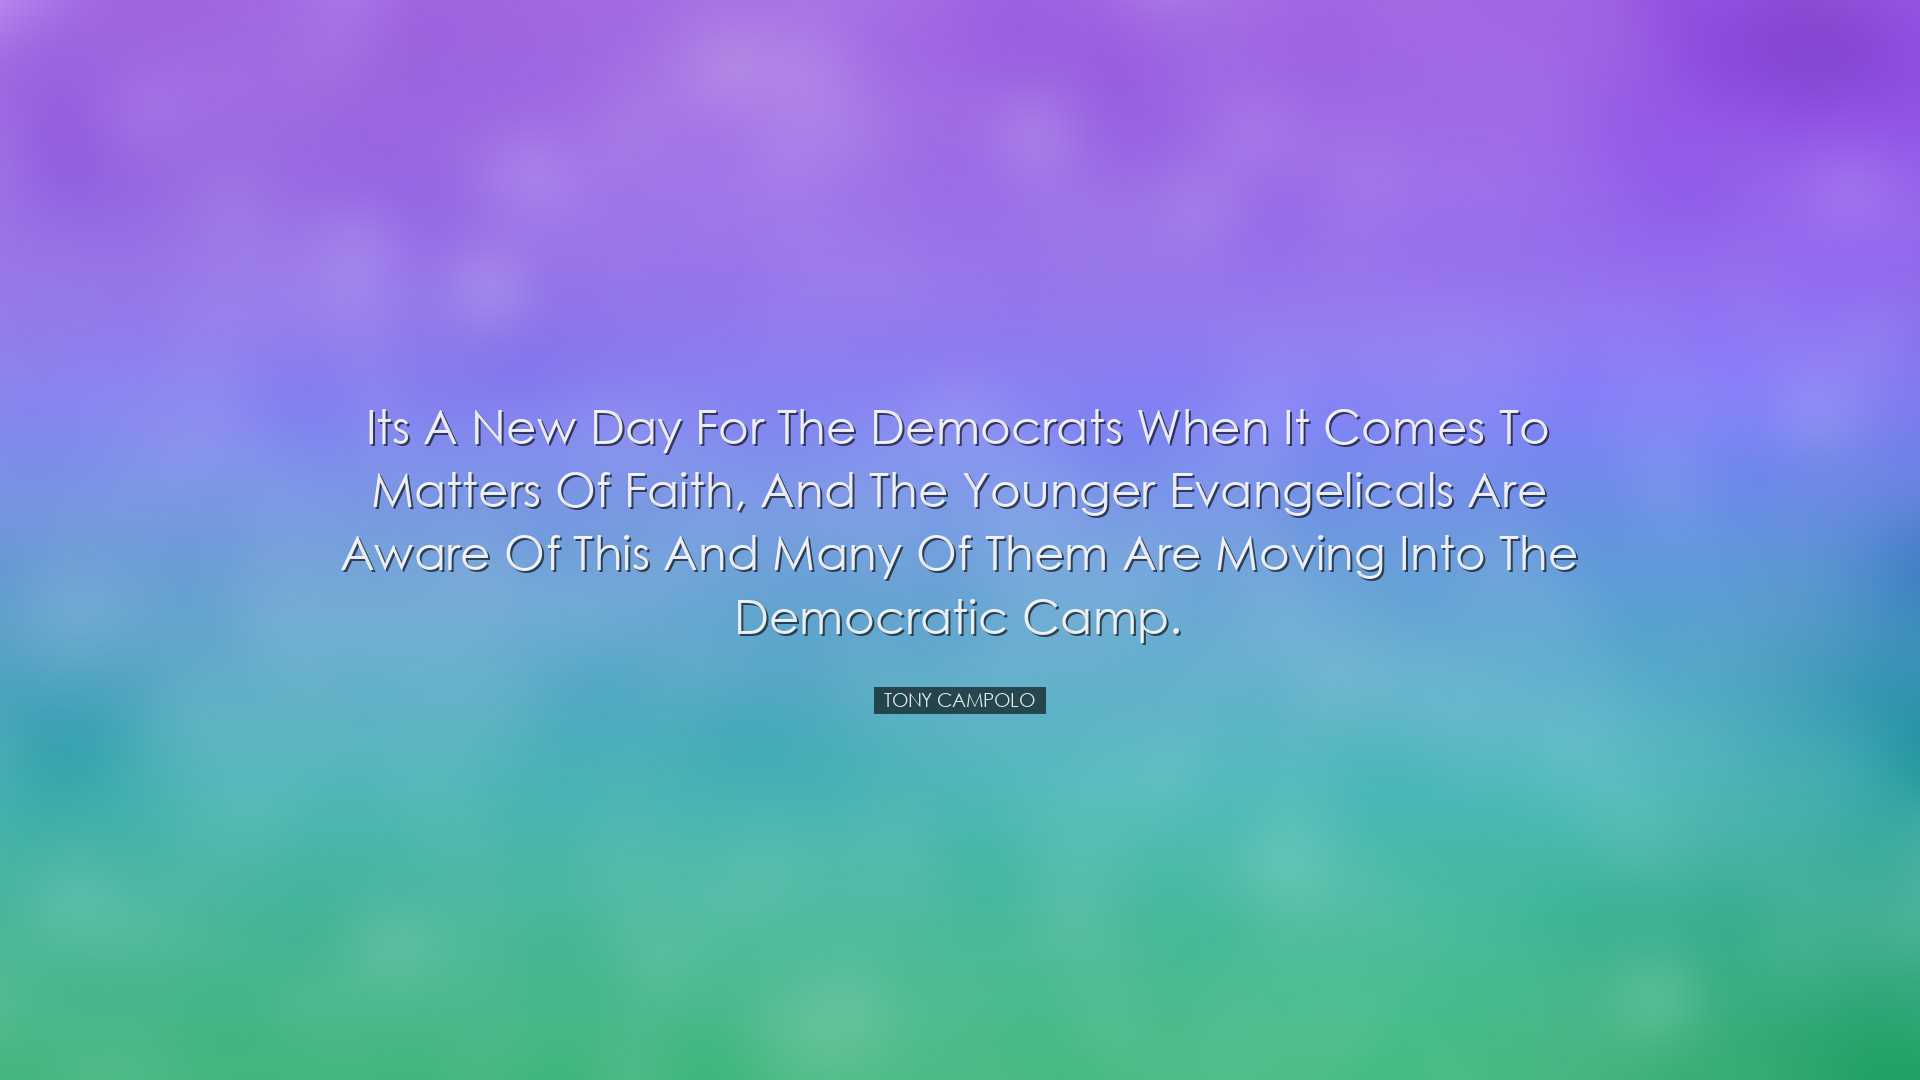 Its a new day for the Democrats when it comes to matters of faith,